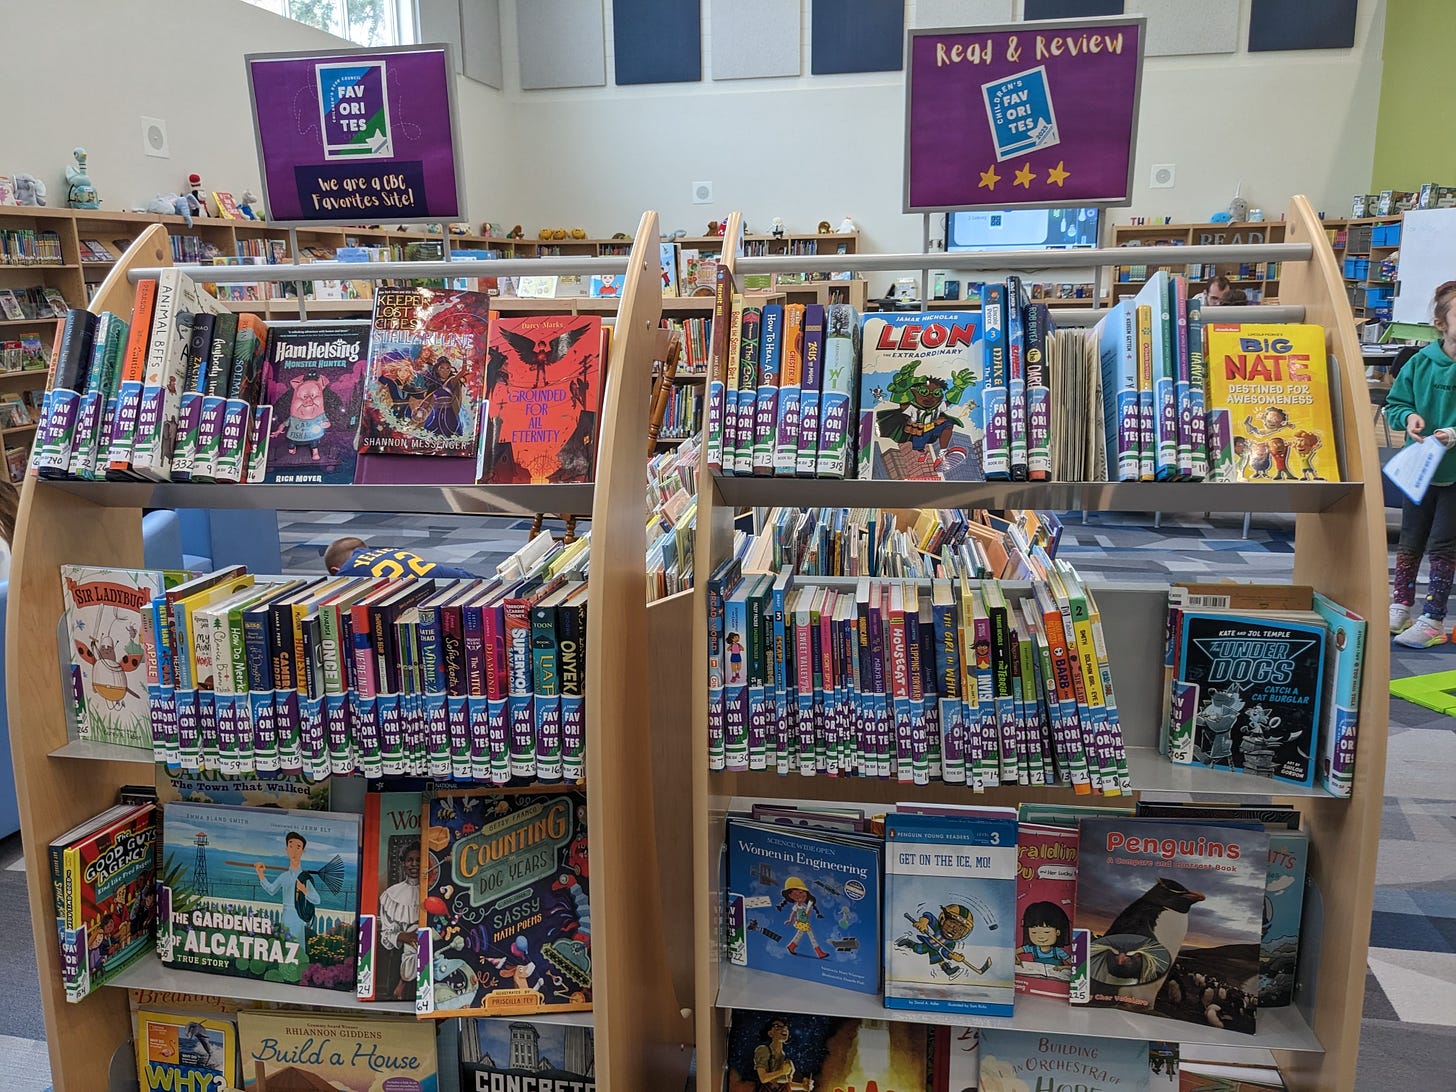 Image: Books available in our LMC for students to read and review, h/t Micki